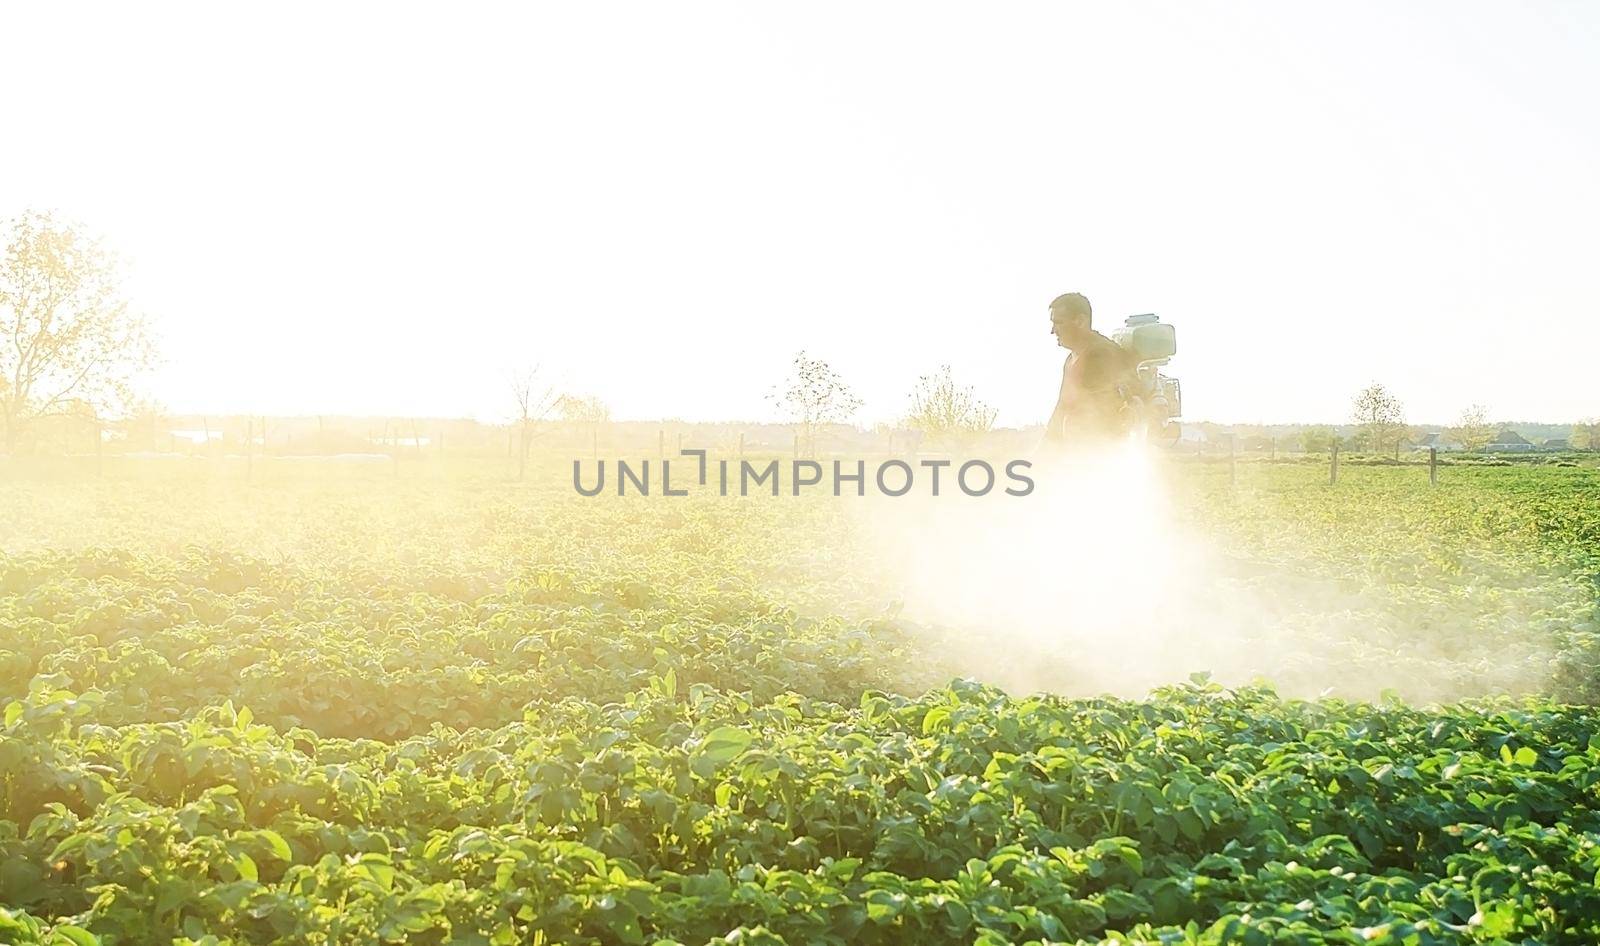 Farmer spraying plants with pesticides in the early morning. Agriculture and agribusiness, agricultural industry. The use of chemicals in agriculture. Protecting against insect and fungal infections.